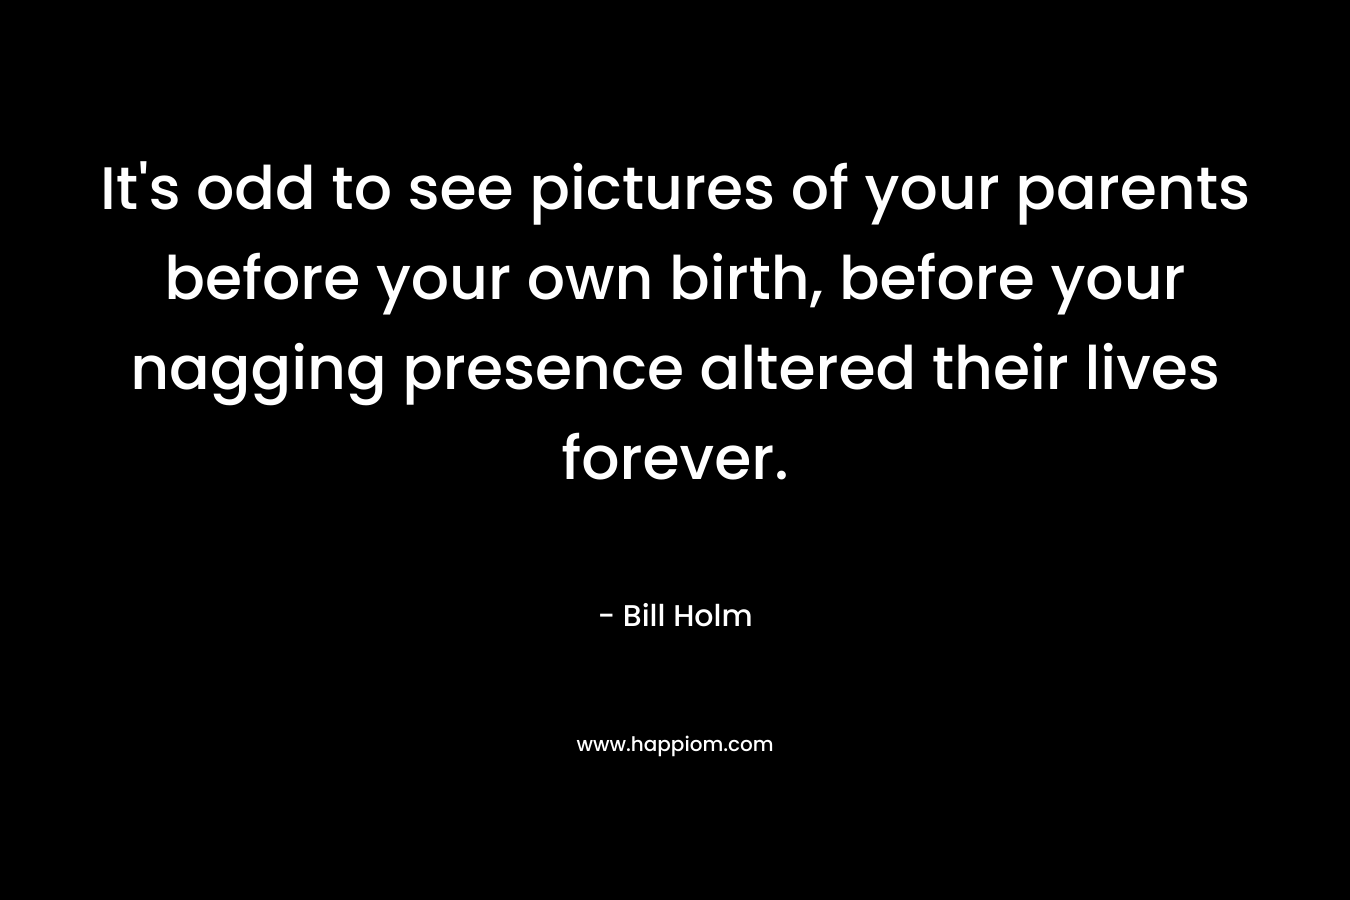 It's odd to see pictures of your parents before your own birth, before your nagging presence altered their lives forever.